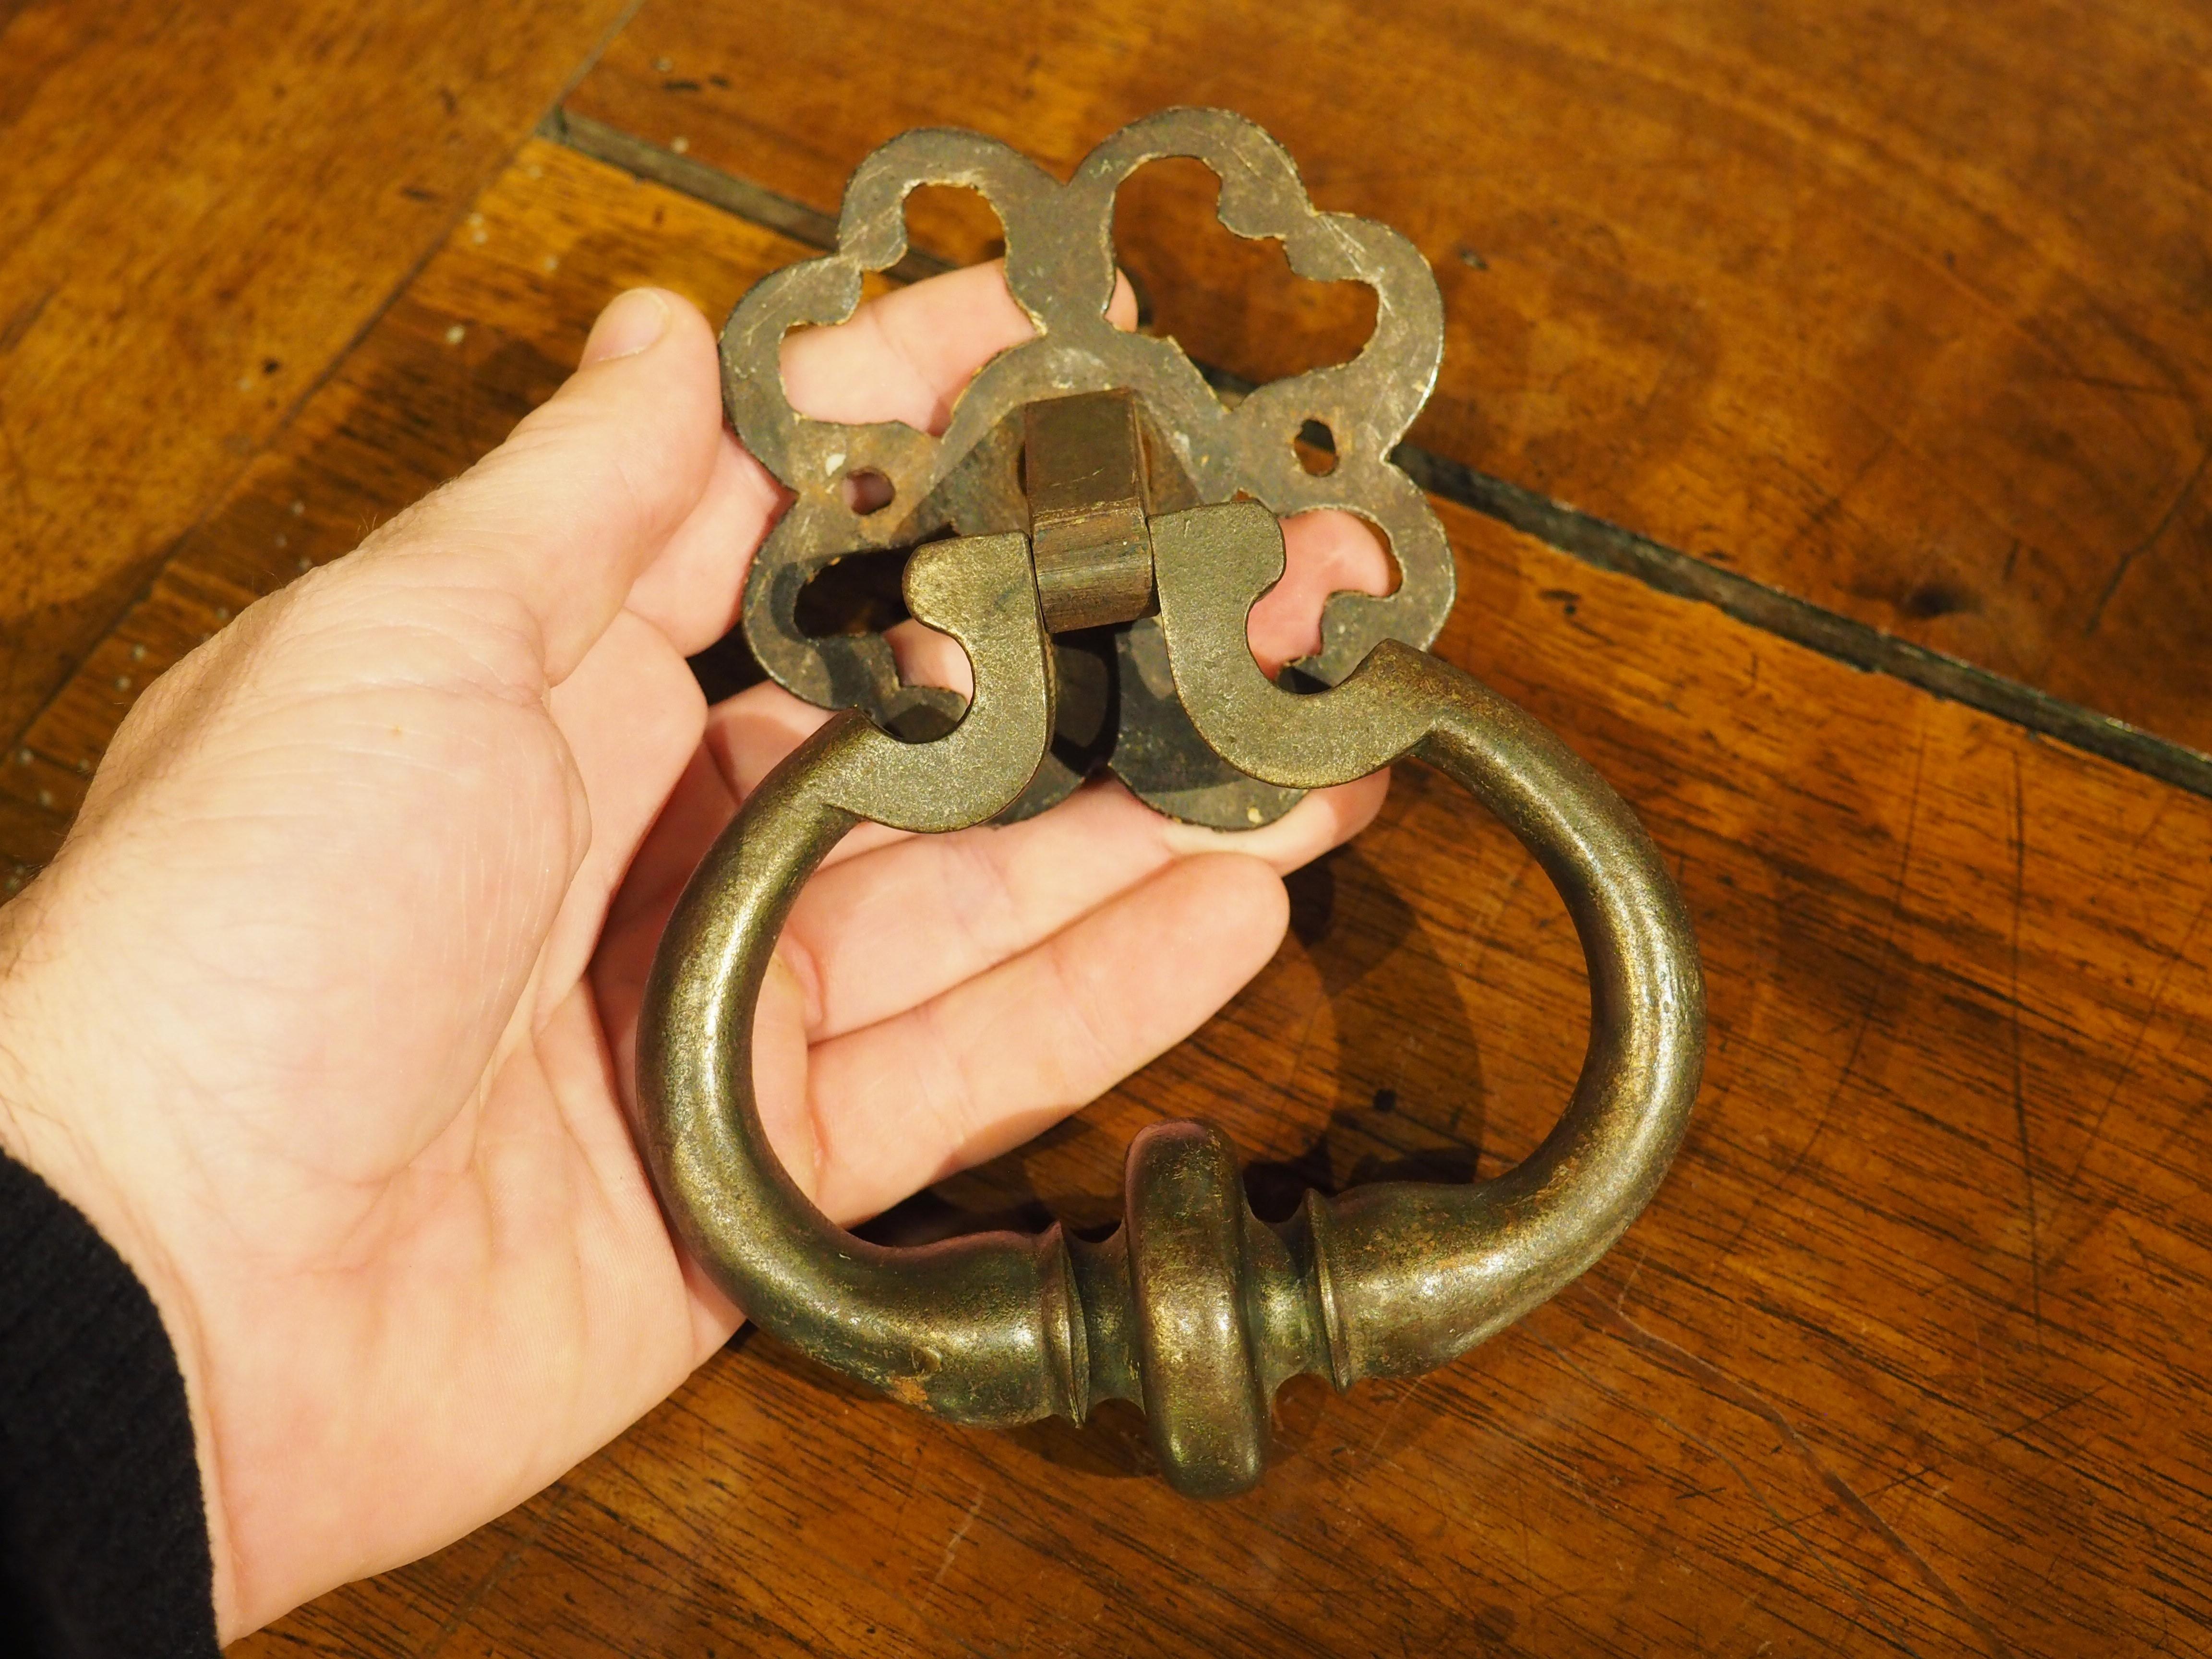 Hand-crafted in France in the 1800’s, this wrought iron door knocker features a pierced quatrefoil backplate. There are two small holes on the sides, where nails would help support the weight of the iron. There is also a larger central hole, which